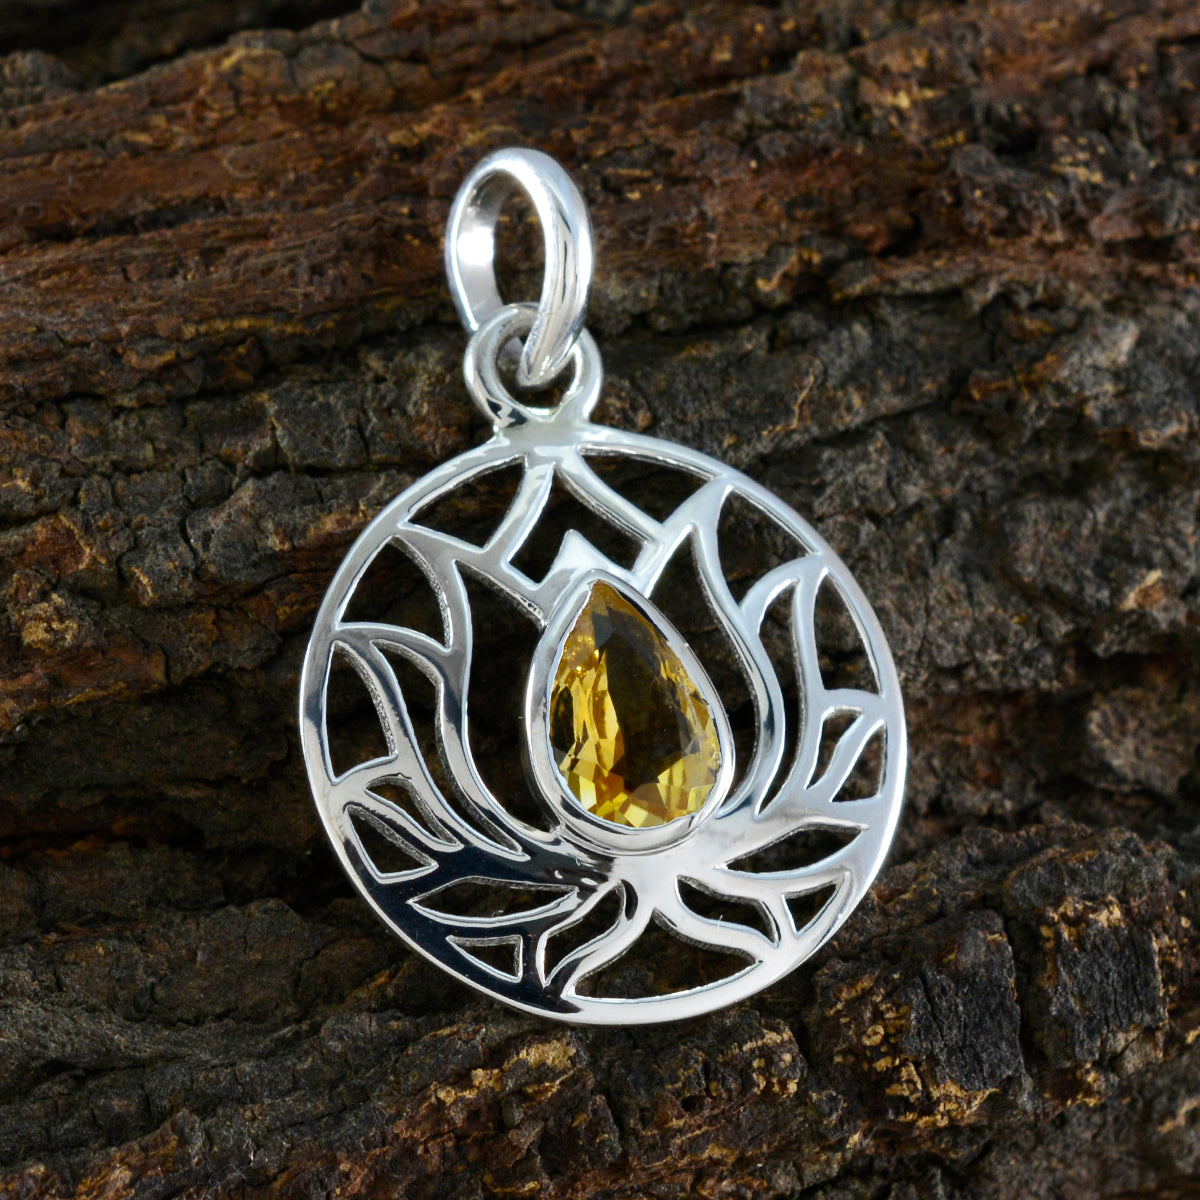 Riyo Stunning Gemstone Pear Faceted Yellow Citrine Sterling Silver Pendant Gift For Friend